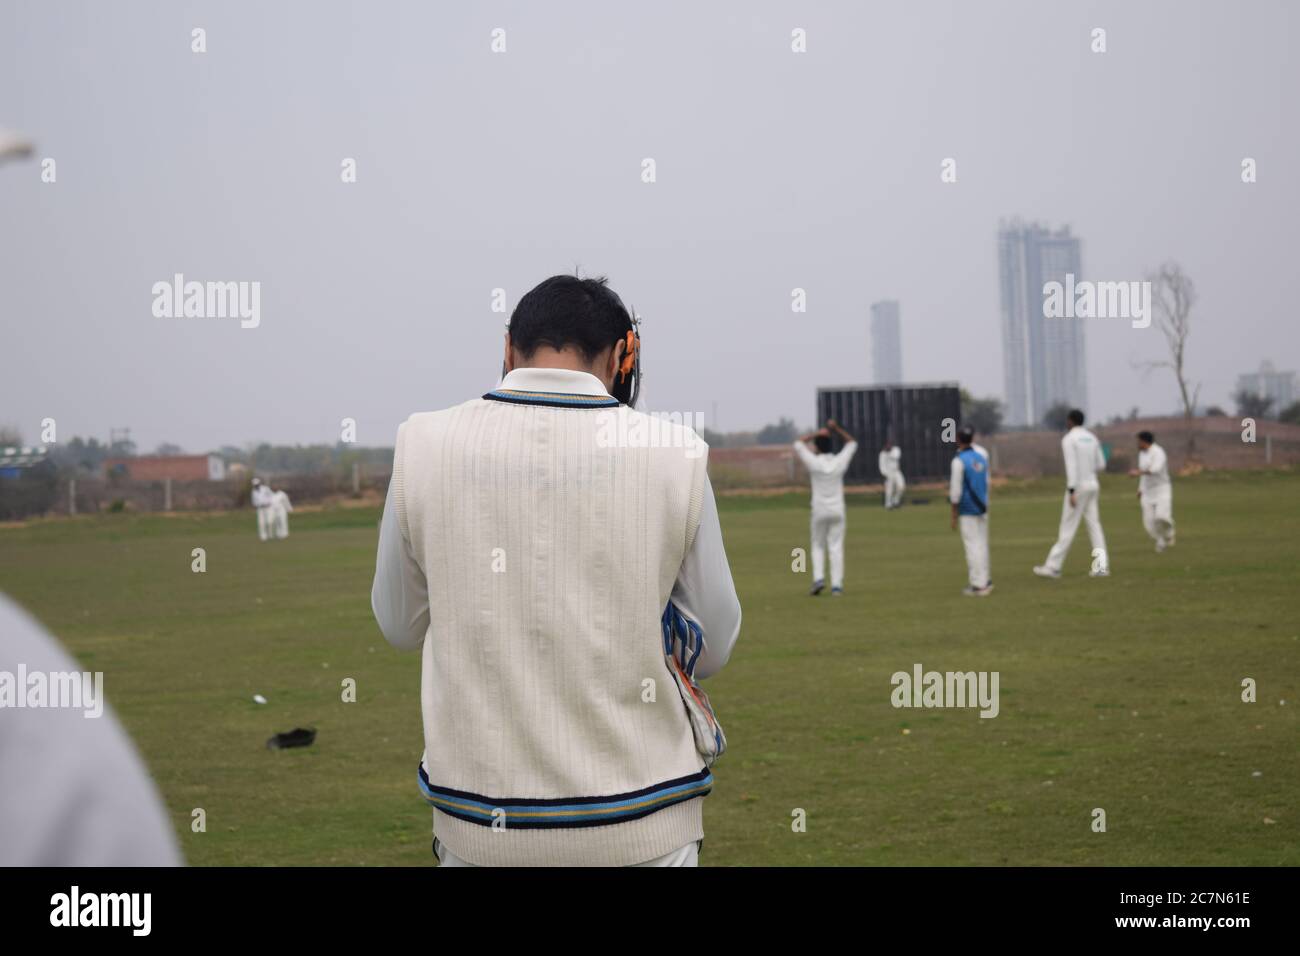 Full length of cricketer playing on field during sunny day, Cricketer on the field in action, Players playing cricket match at field during the day ti Stock Photo